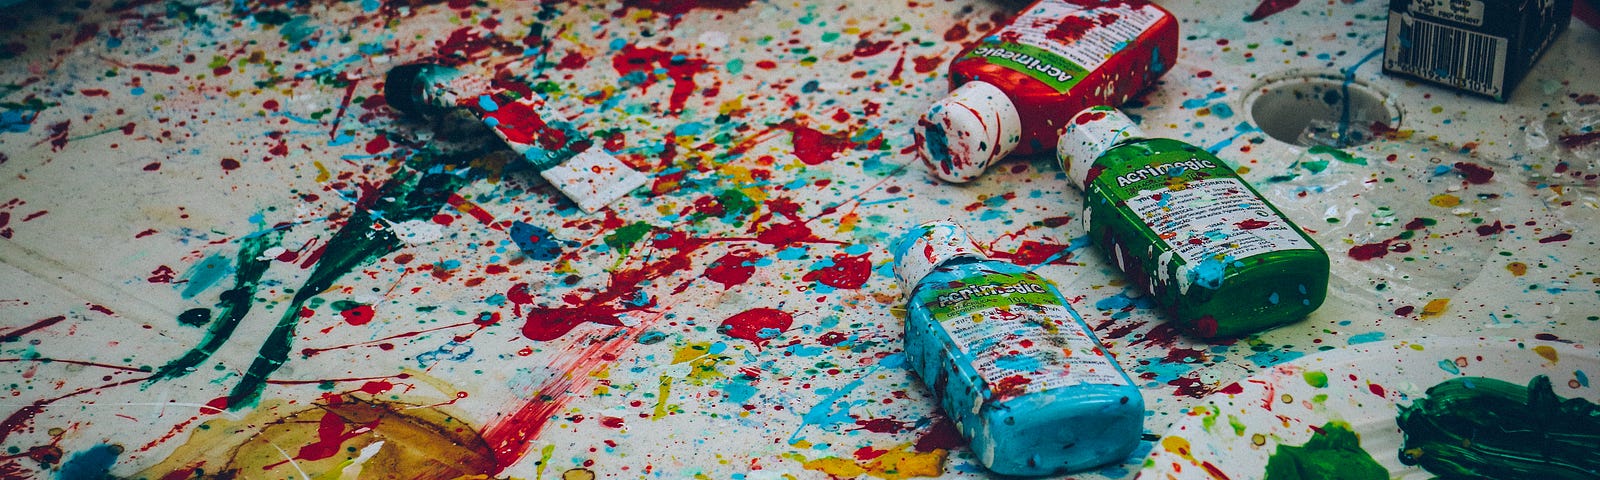 Image shows a cloth covered in paint splatters and smudges in yellow, light blue, red and yellow, with different bottles of paint lying on top of the cloth (also covered in splatter).